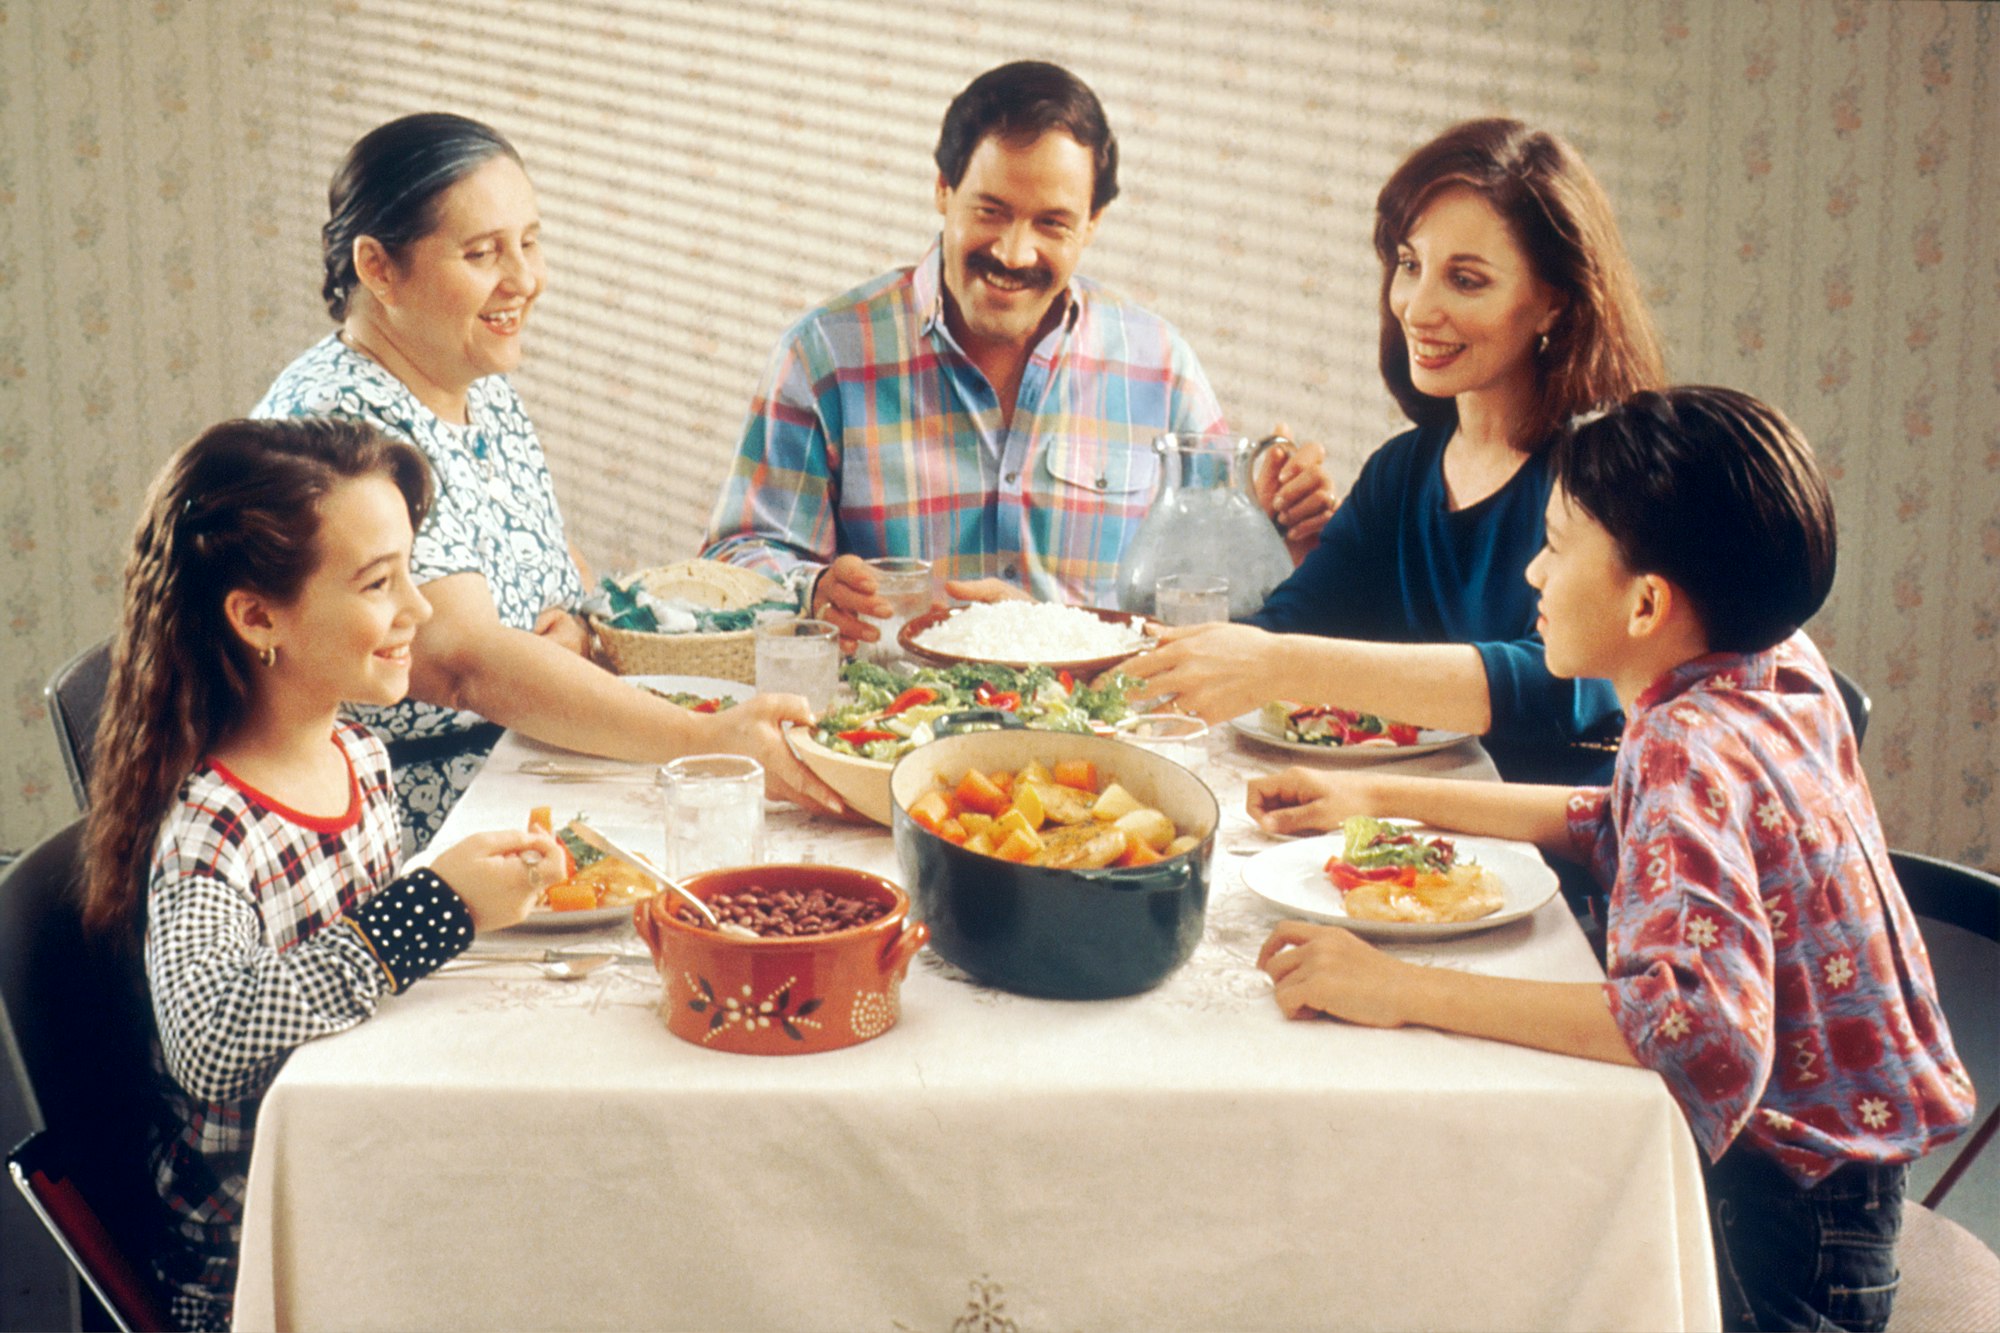 Family Eating Meal. A Hispanic family (male adult, two female adults, female child, and male child) enjoy a meal at the dinner table.